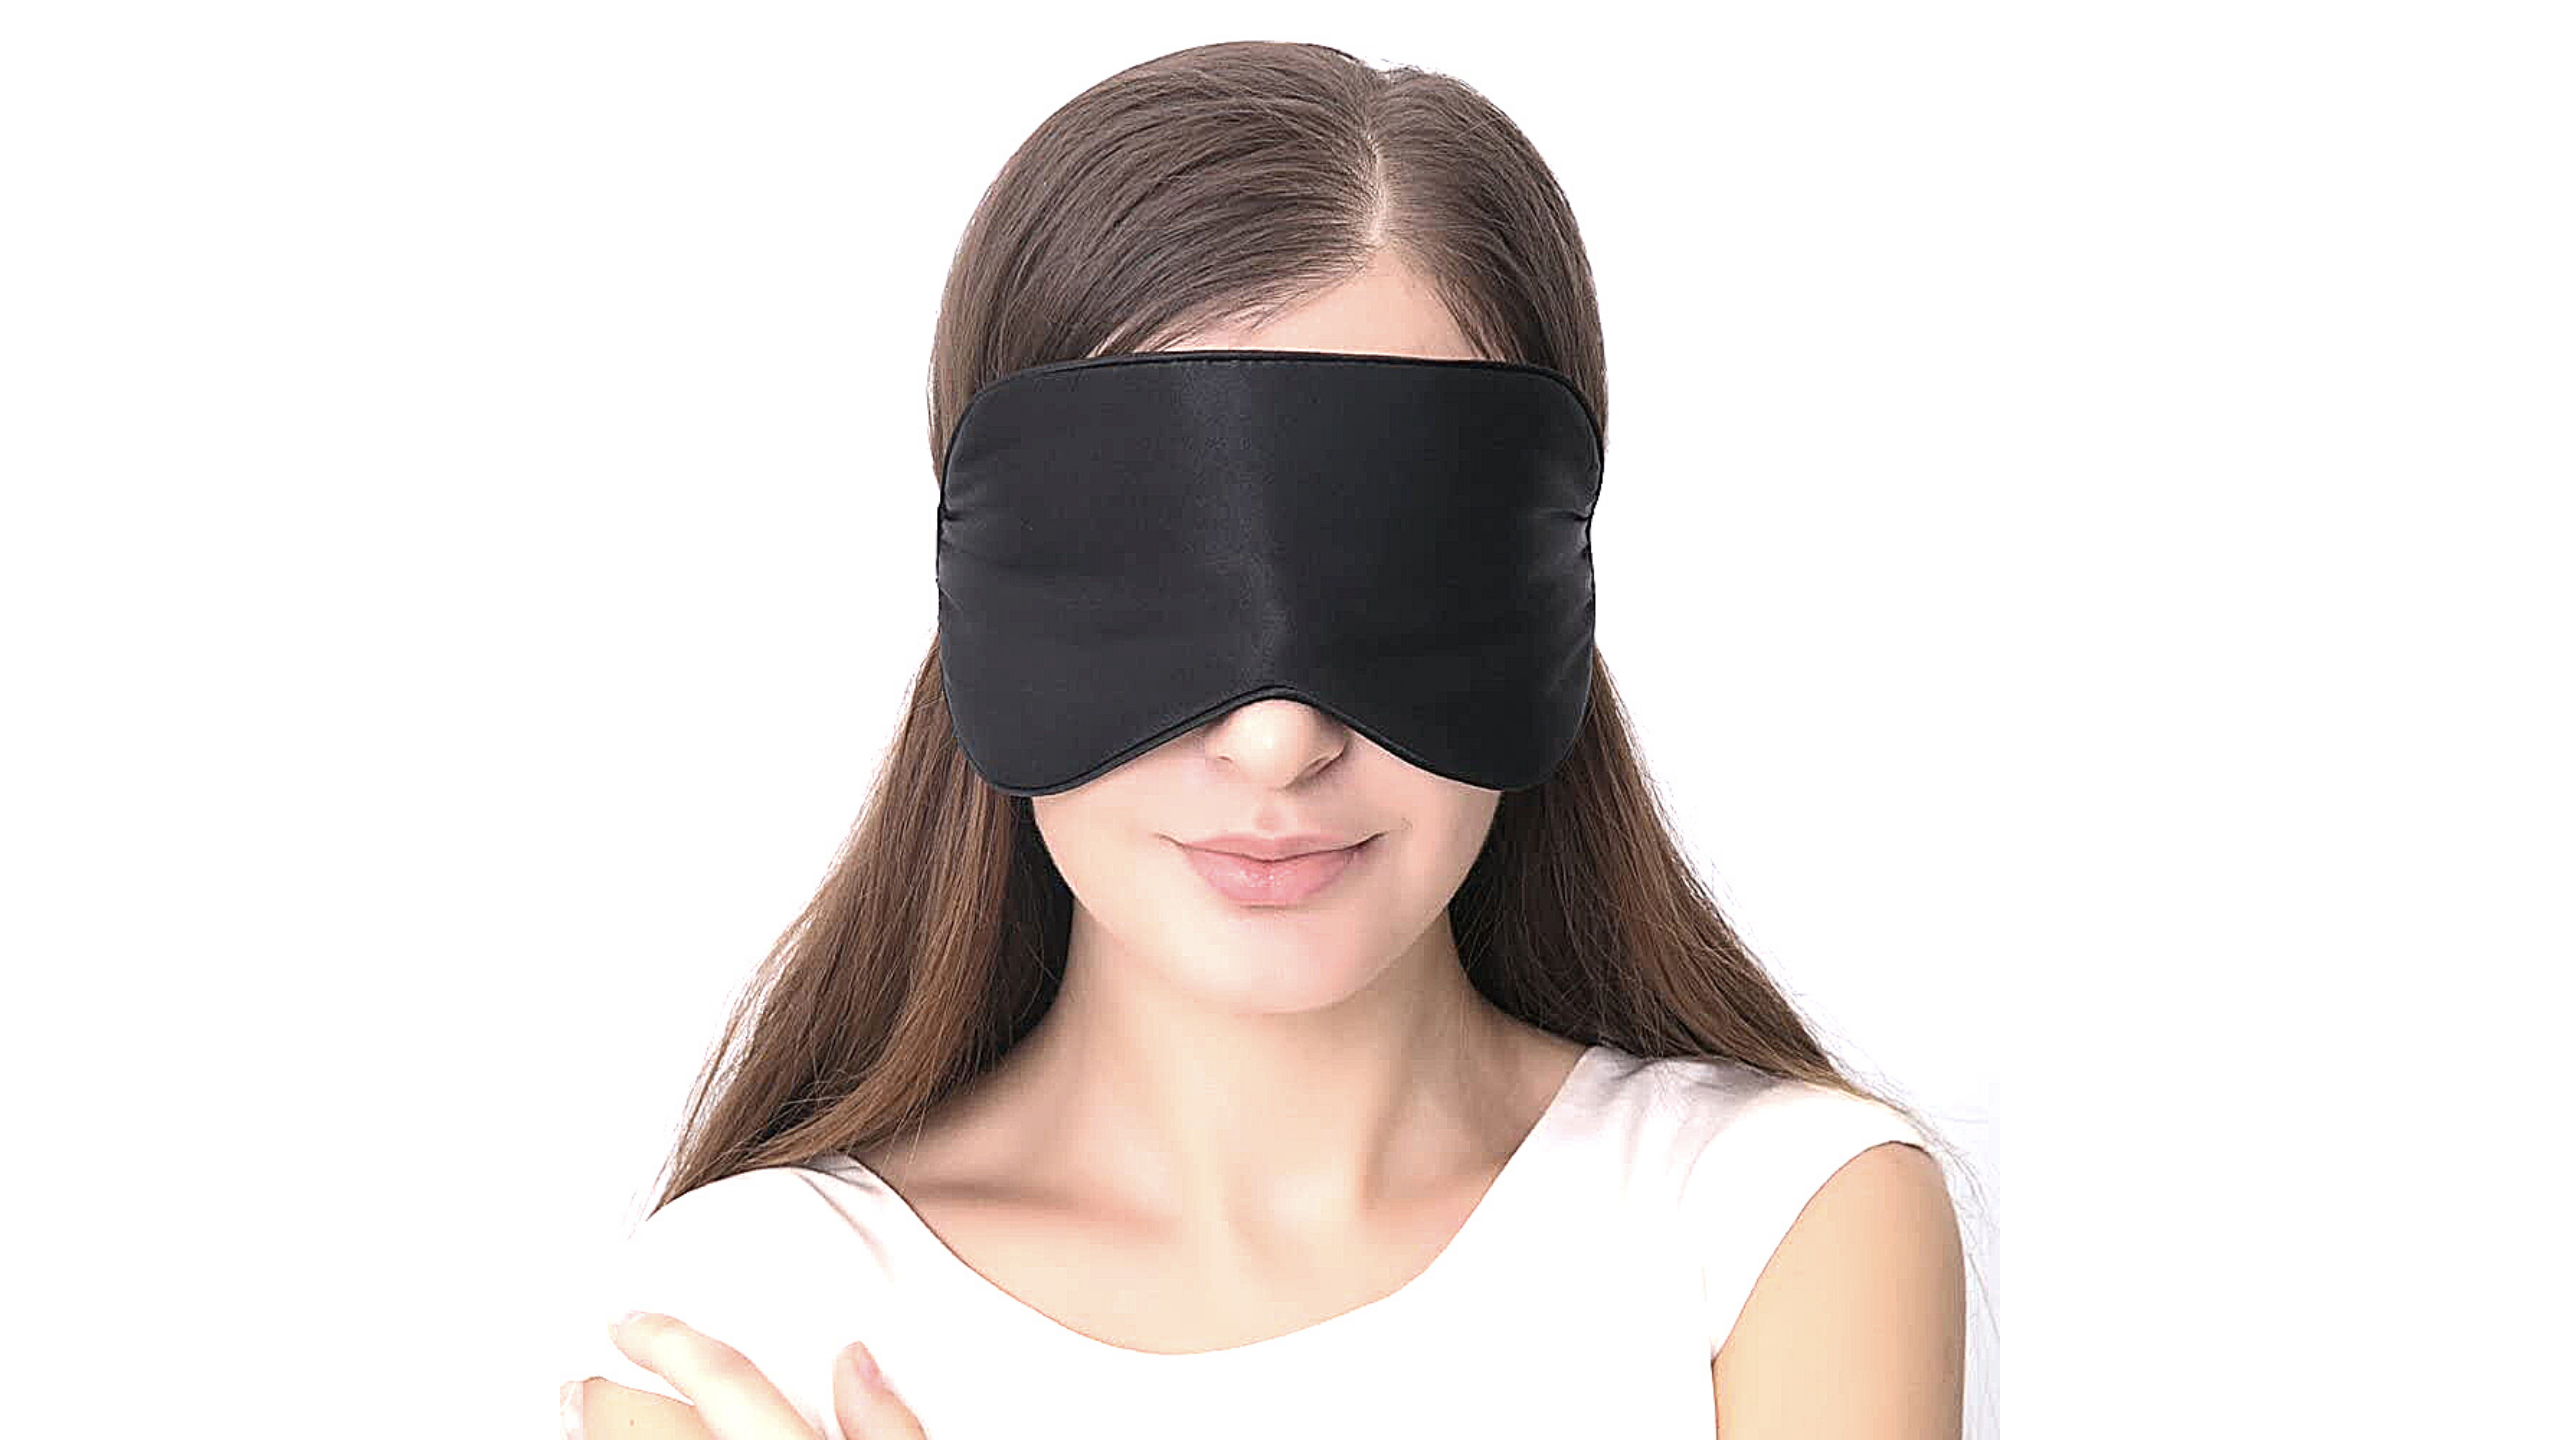 This $9.99 Silk Eye Mask Has Over 10K 5-Star Reviews and Promises a Good Night's Sleep